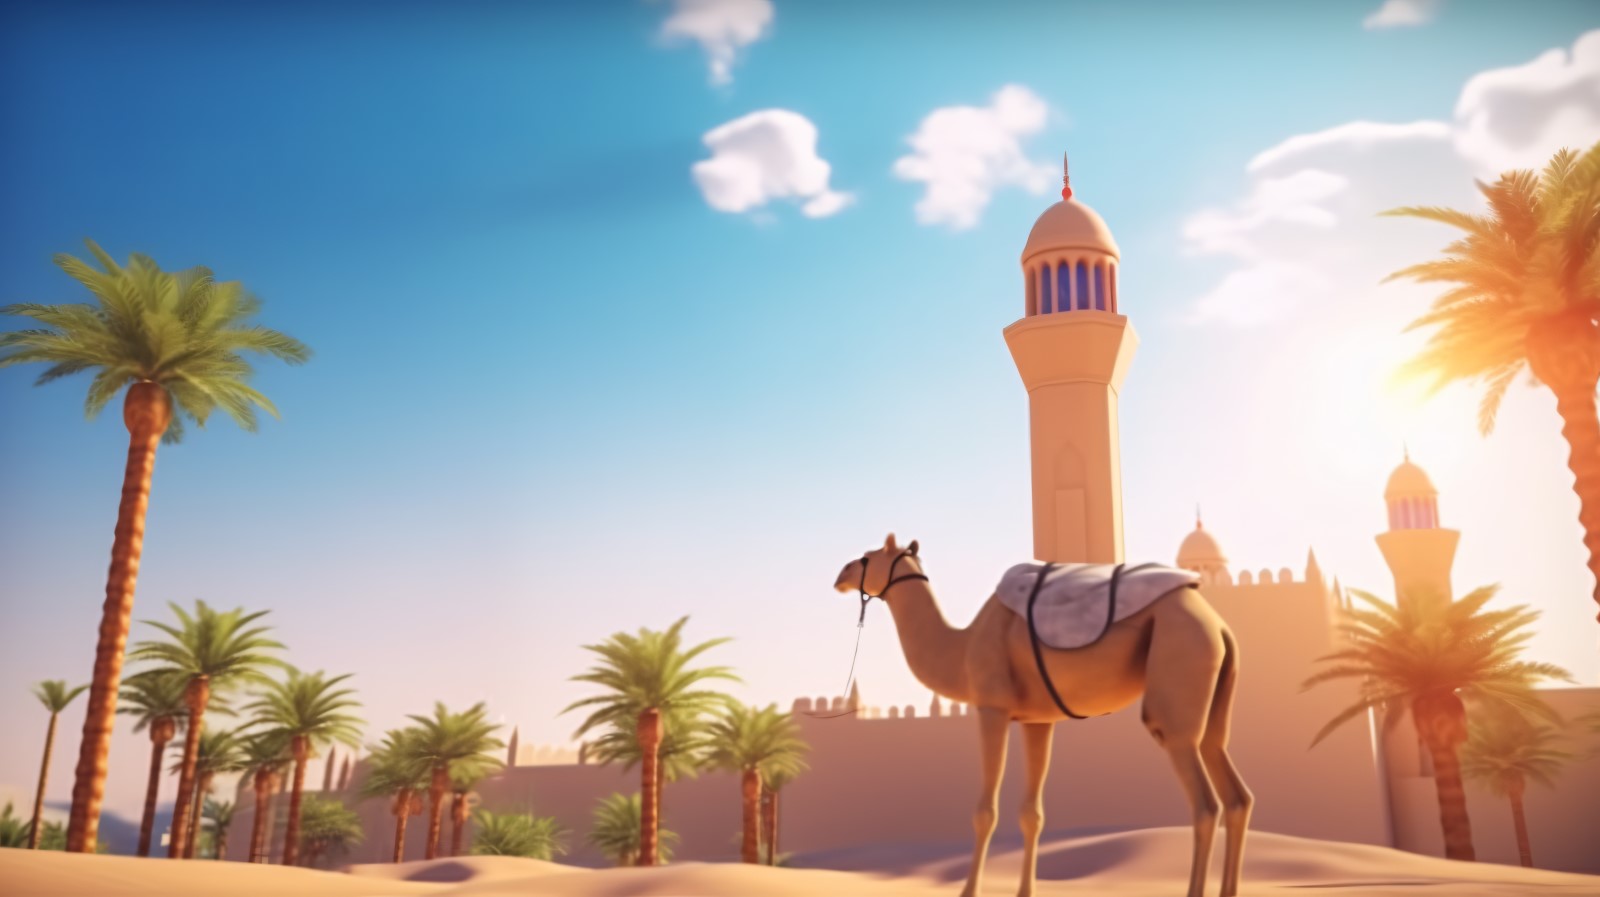 Camel on desert with mosque and palm tree sunny day 01